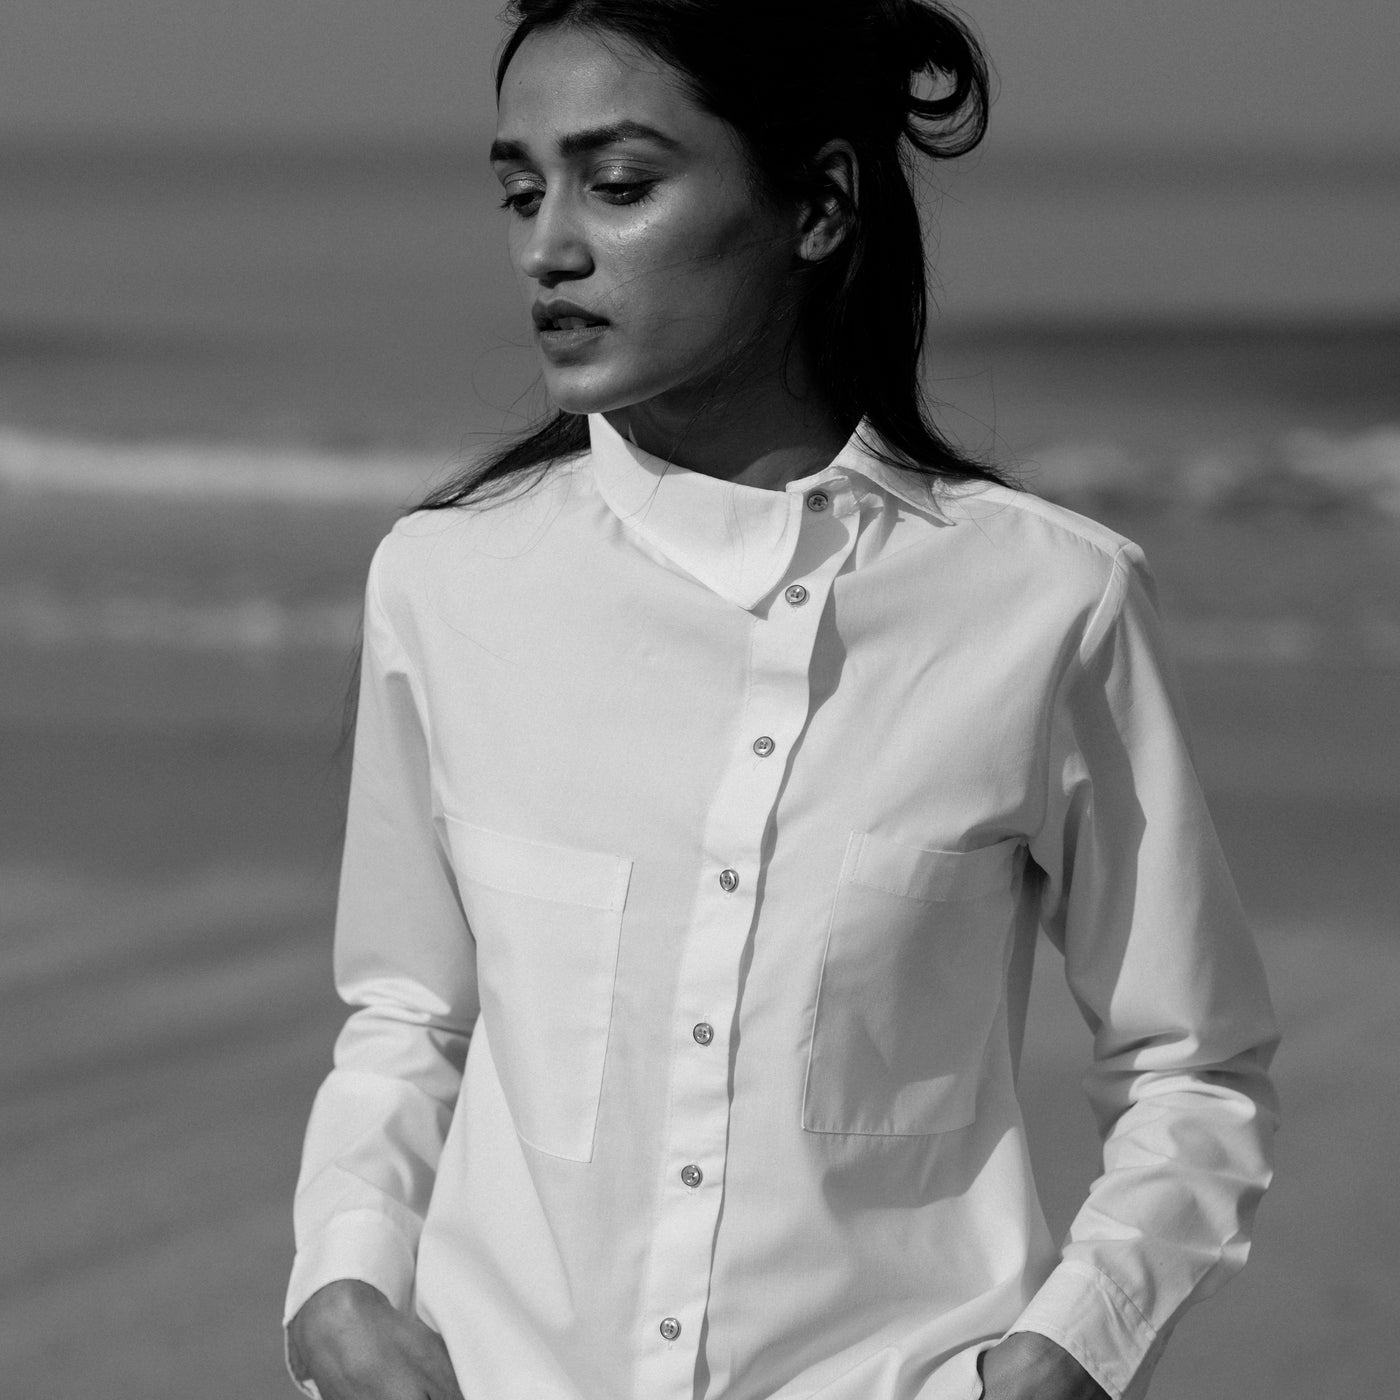 White collared upcycled shirt. It has a front button placket and an irregular hemline.